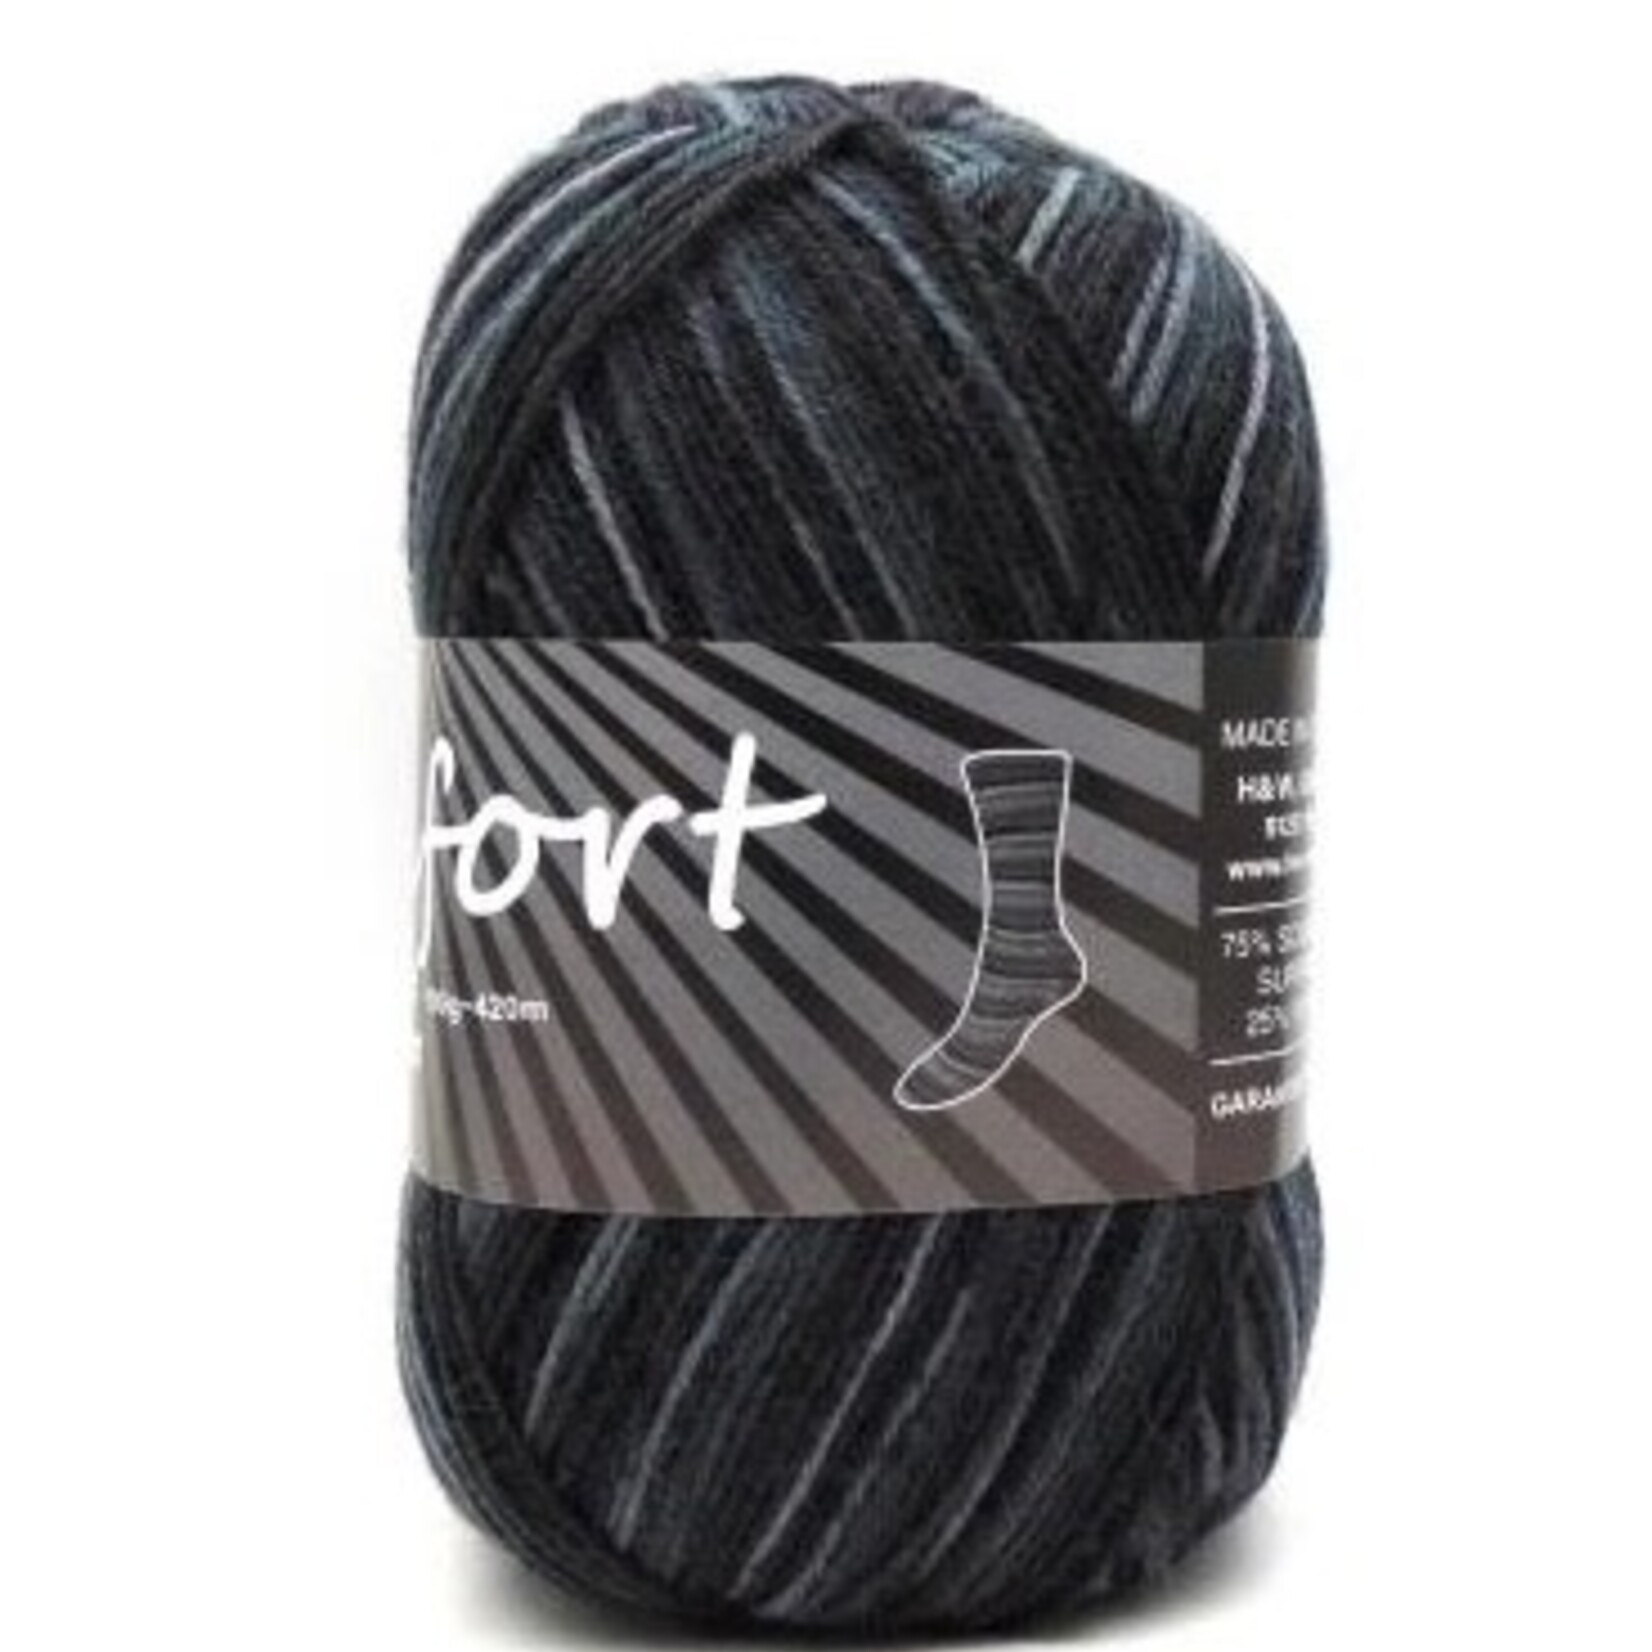 Comfort Wolle Yarns MY02 Comfort Wolle 4ply by Comfort Wolle Yarns